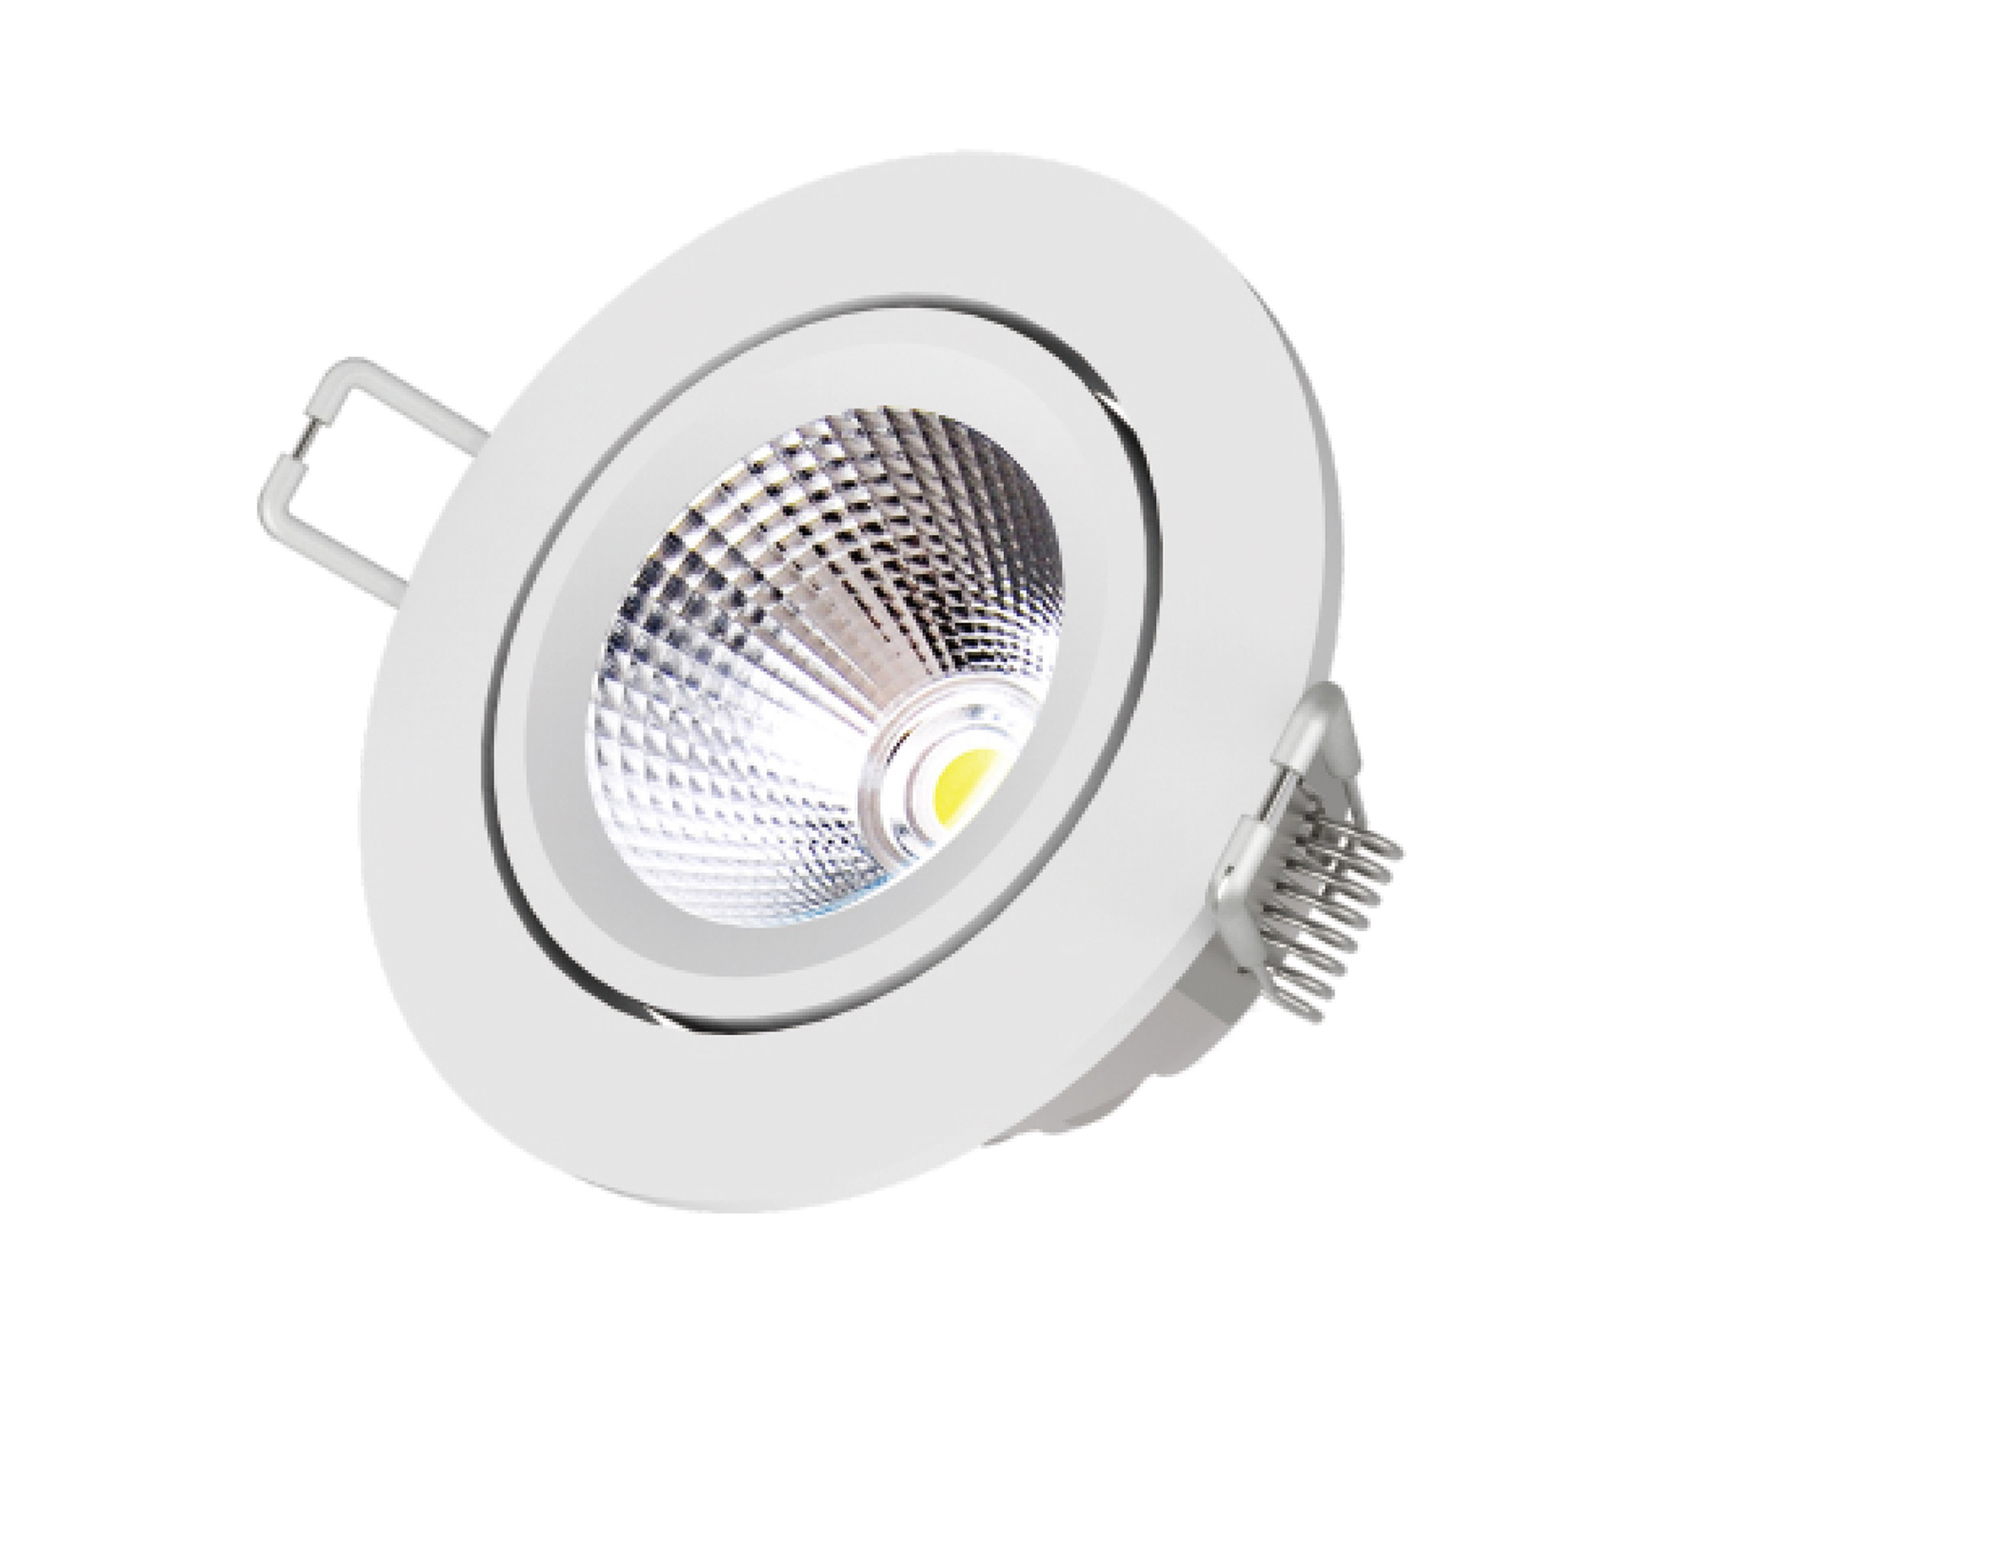 SD-06R-Y  Smart Spot light; RF 2.4GHz; 6W; Dimmable; 3000K; 24 degree beam angle; 200-240Vac; F75mm cut-out; IP20.